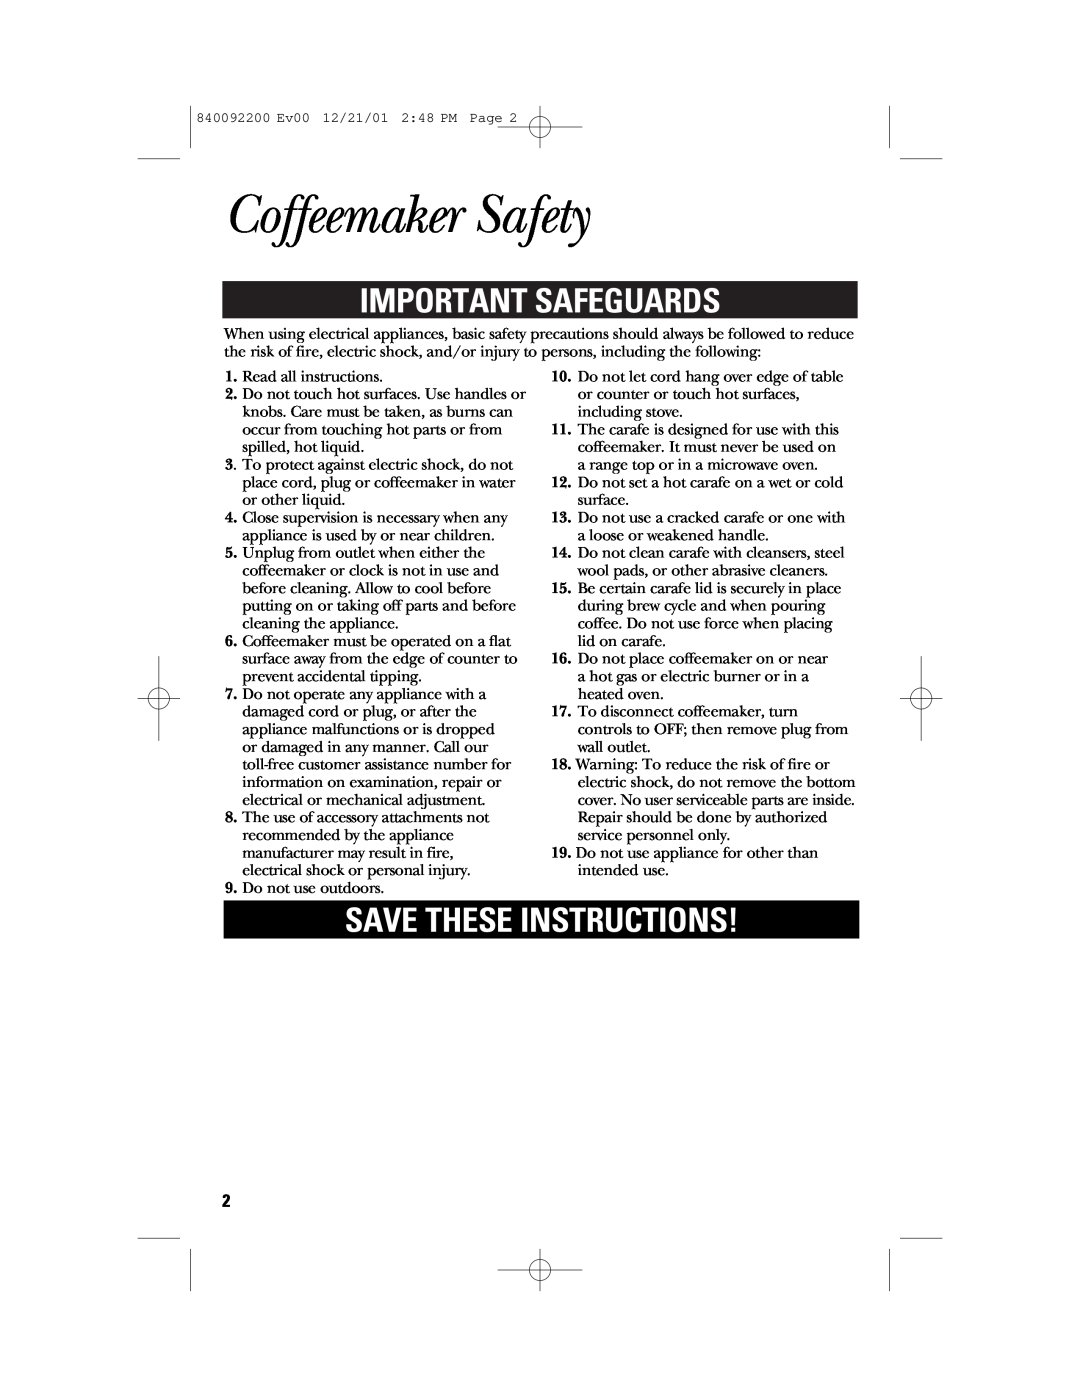 GE 840092200, 106721 manual Coffeemaker Safety, Important Safeguards, Save These Instructions 